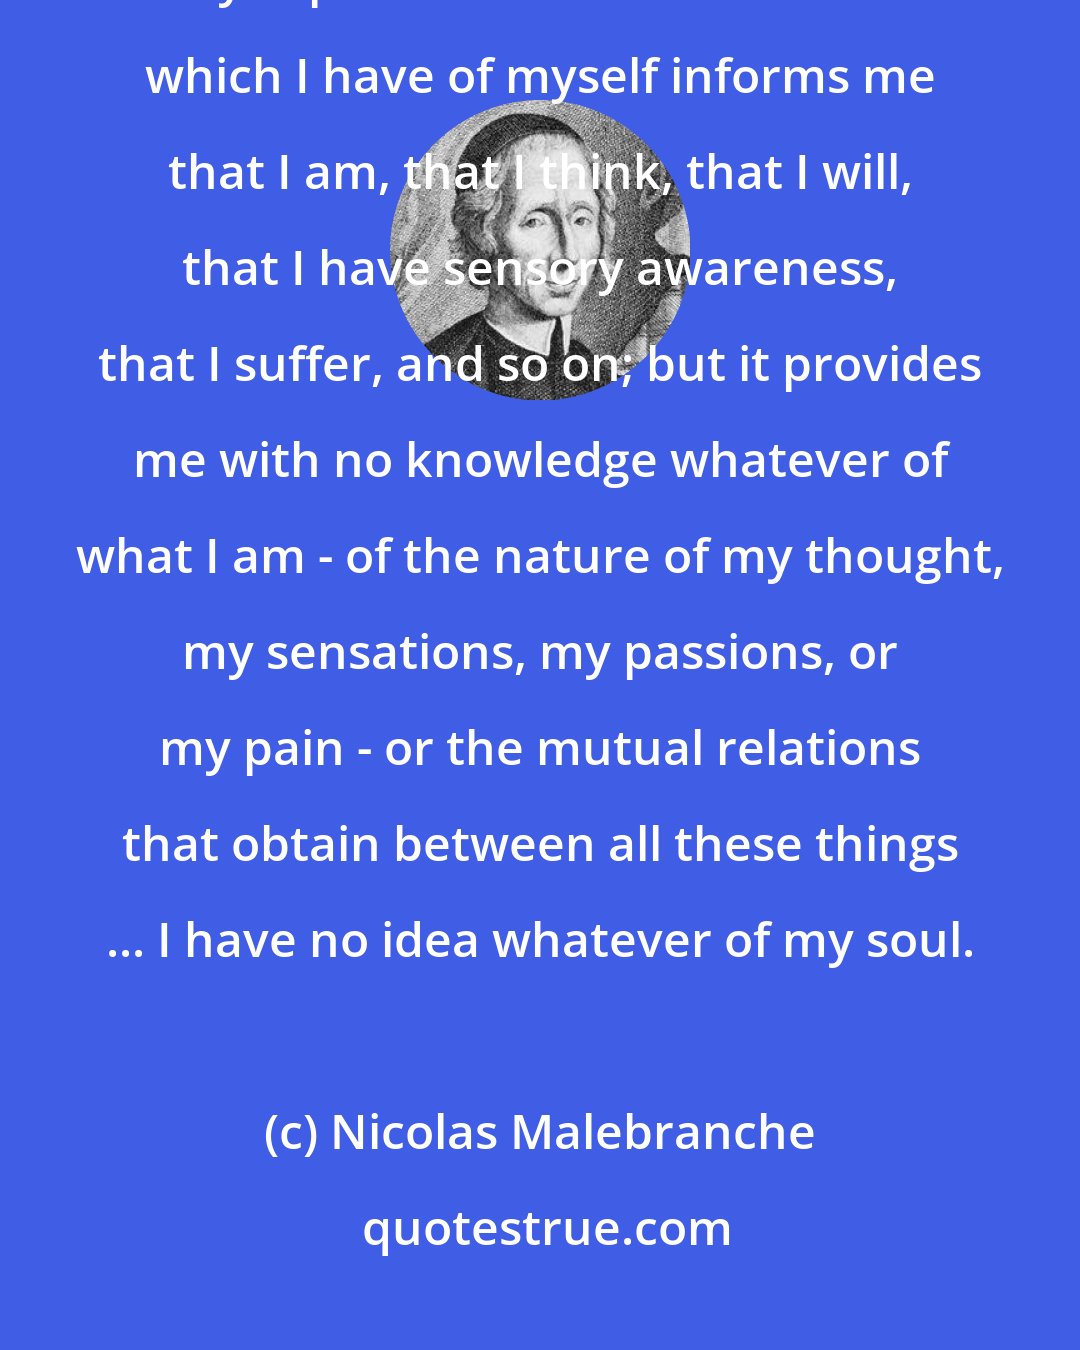 Nicolas Malebranche: I am unable, when I turn to myself, to recognize any of my faculties or my capacities. The inner sensation which I have of myself informs me that I am, that I think, that I will, that I have sensory awareness, that I suffer, and so on; but it provides me with no knowledge whatever of what I am - of the nature of my thought, my sensations, my passions, or my pain - or the mutual relations that obtain between all these things ... I have no idea whatever of my soul.